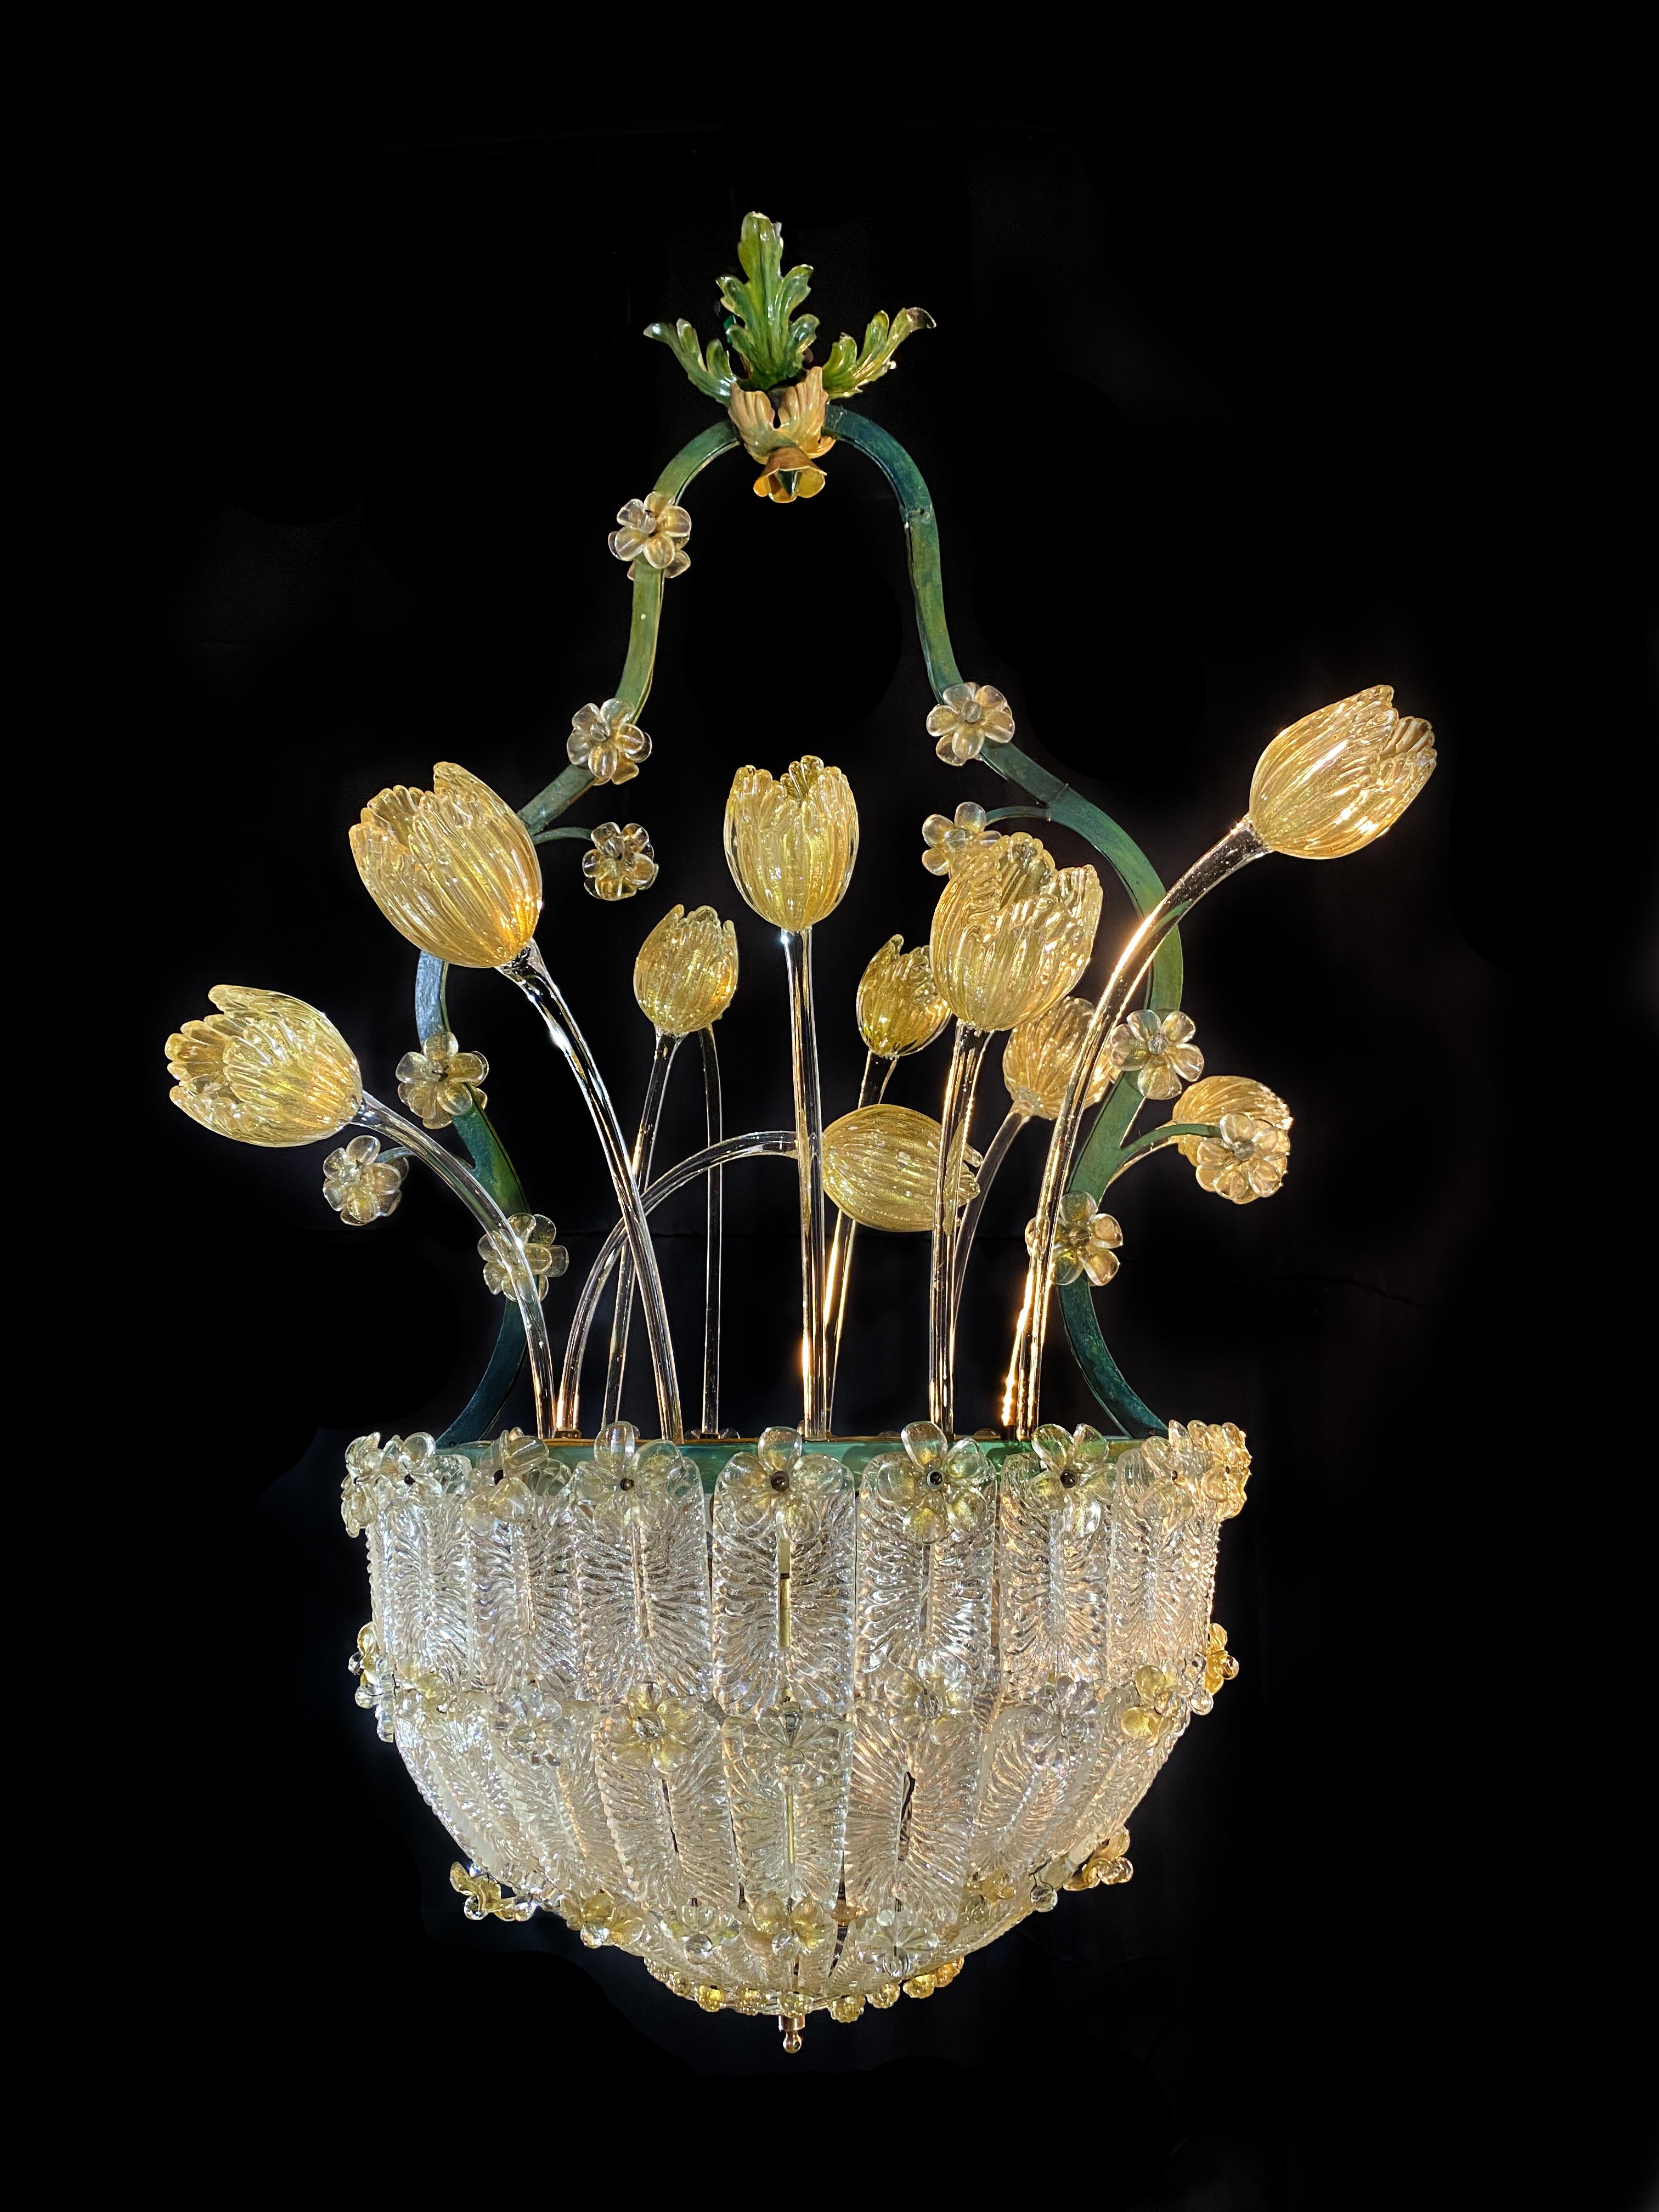 Incredibly beautiful chandelier attributed to the renowned Barovier & Toso. A helmet of glasses adorned with roses and golden tulips.